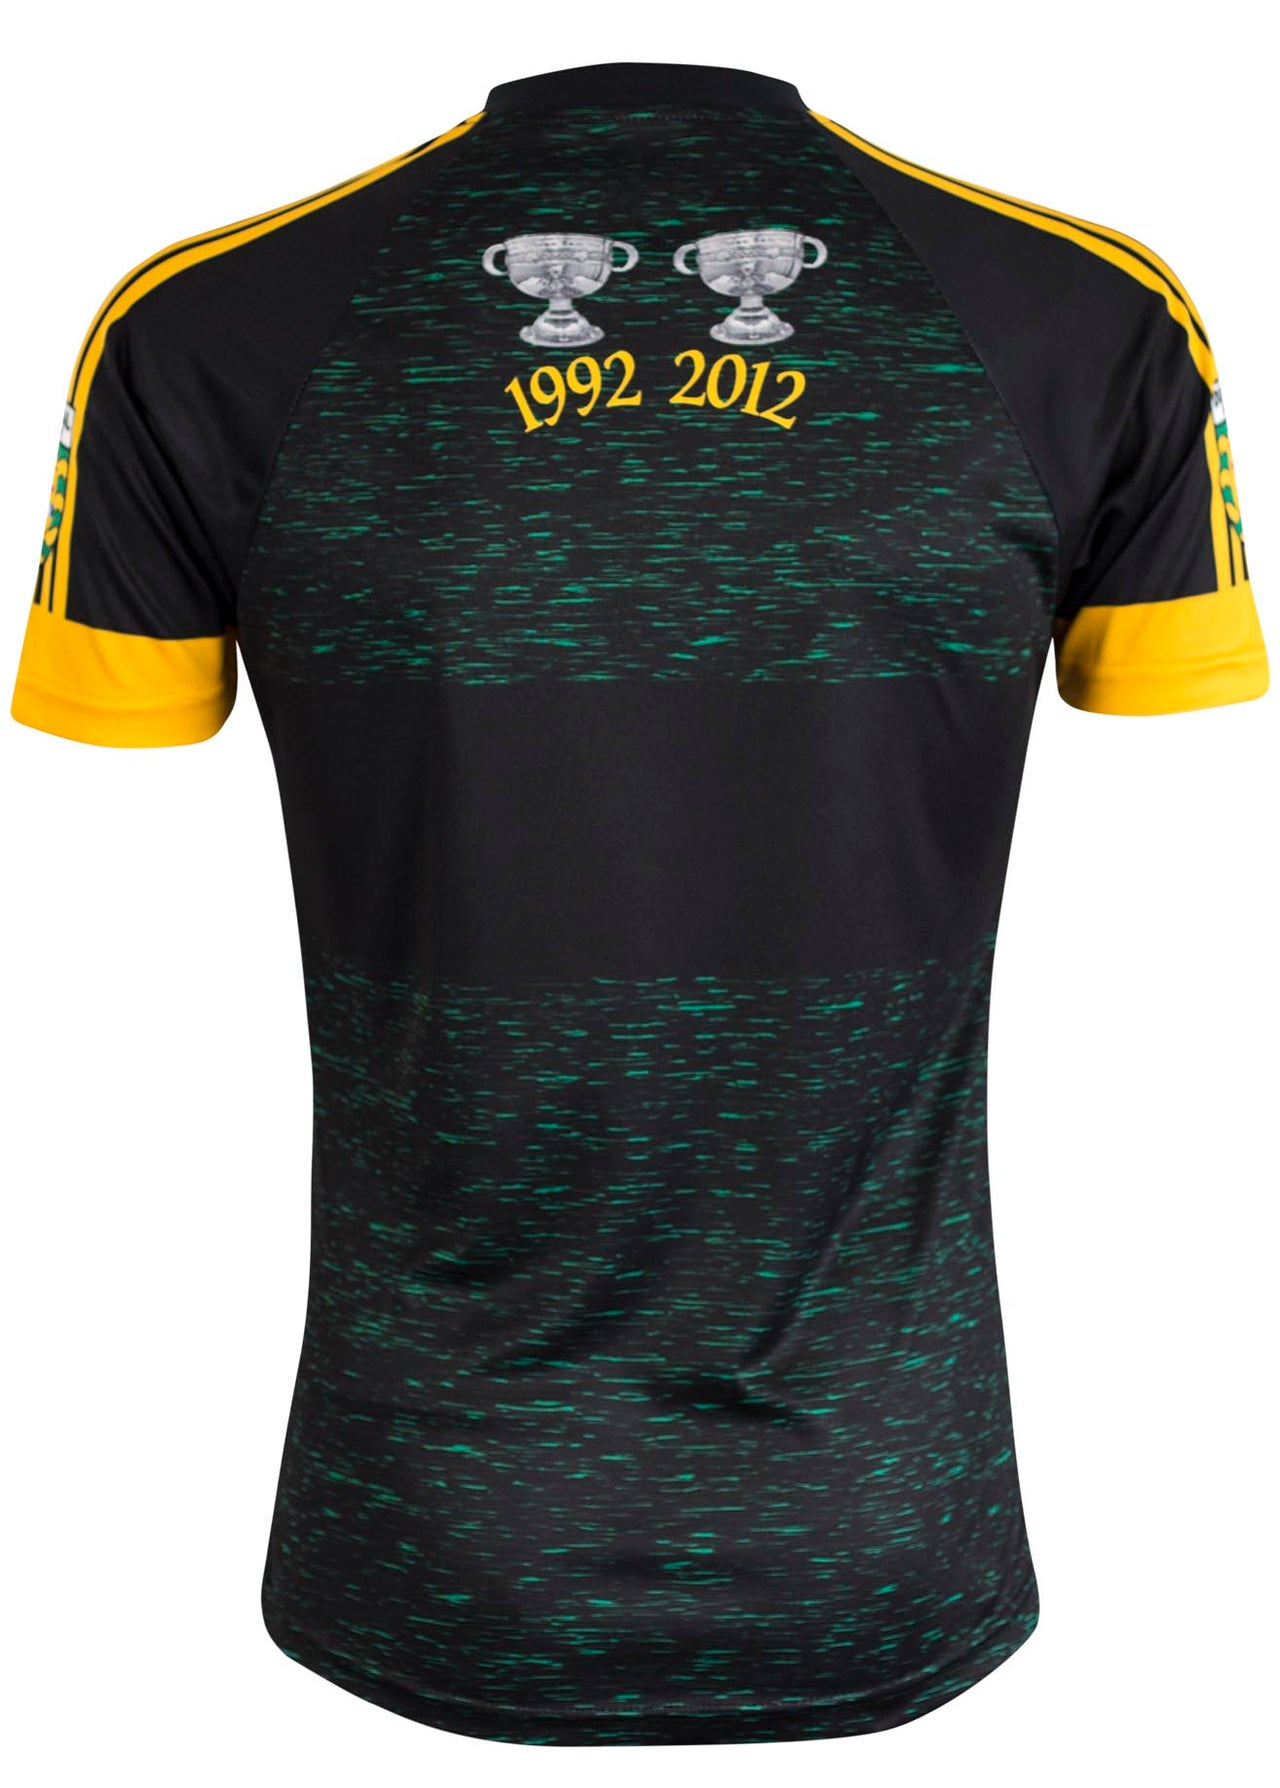 Donegal New York Away Jersey Player Fit Adult